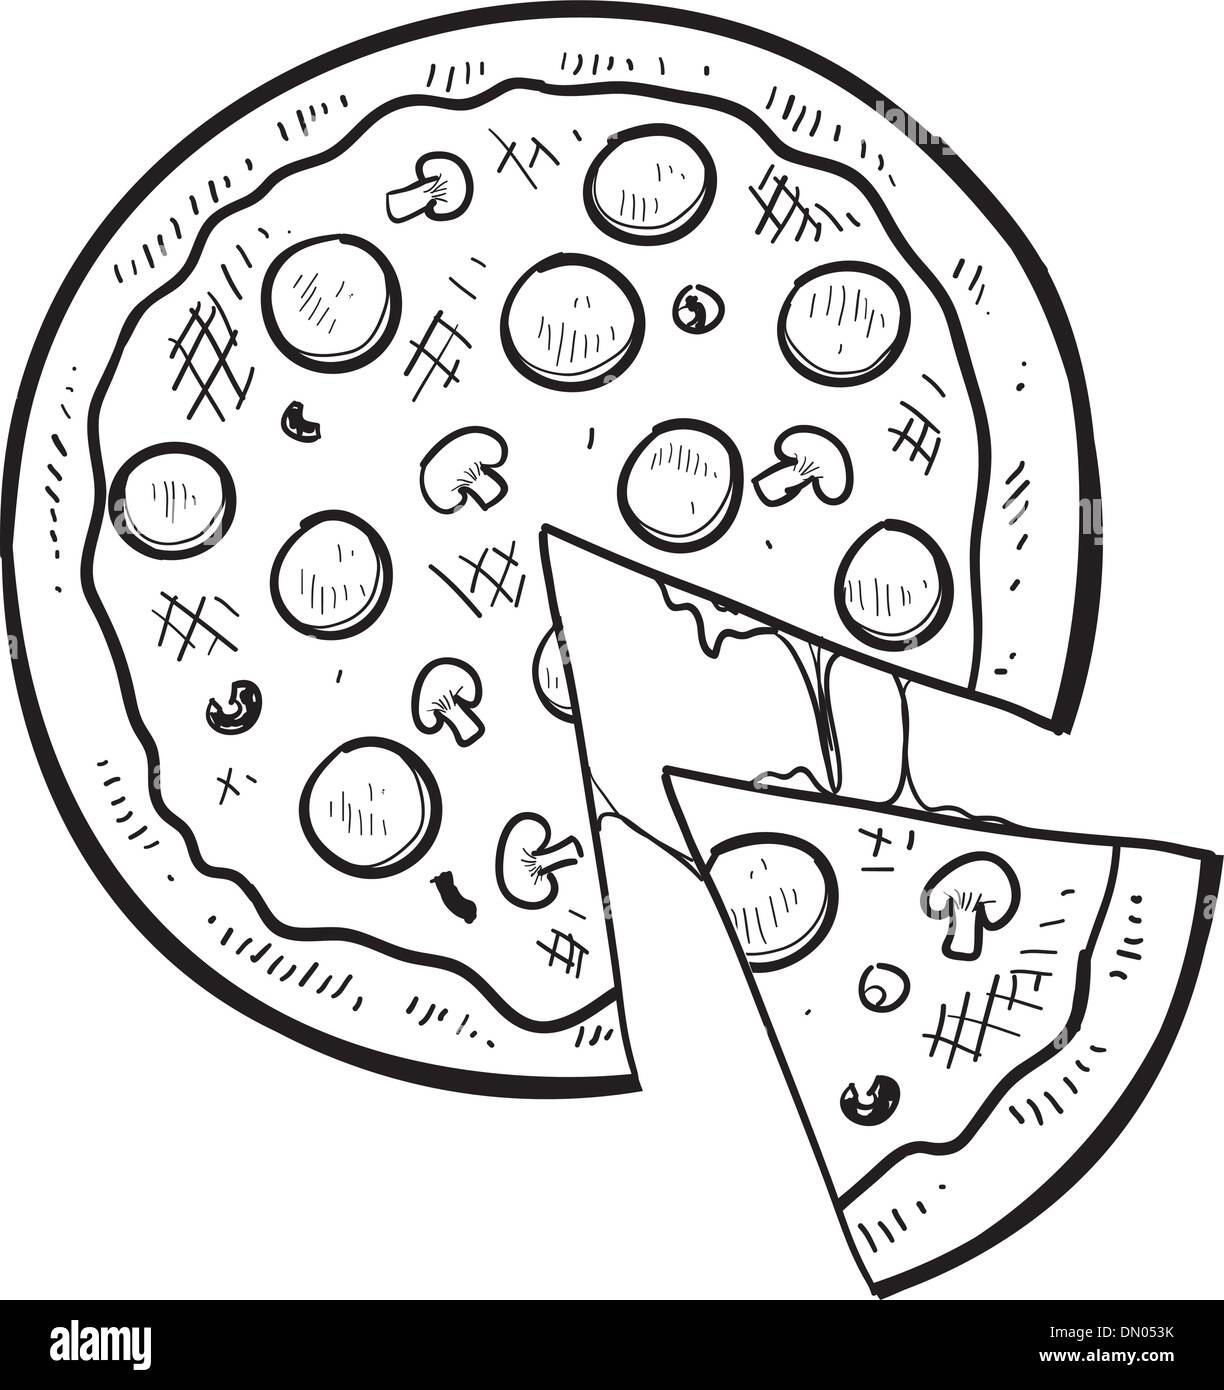 Pizza Drawing